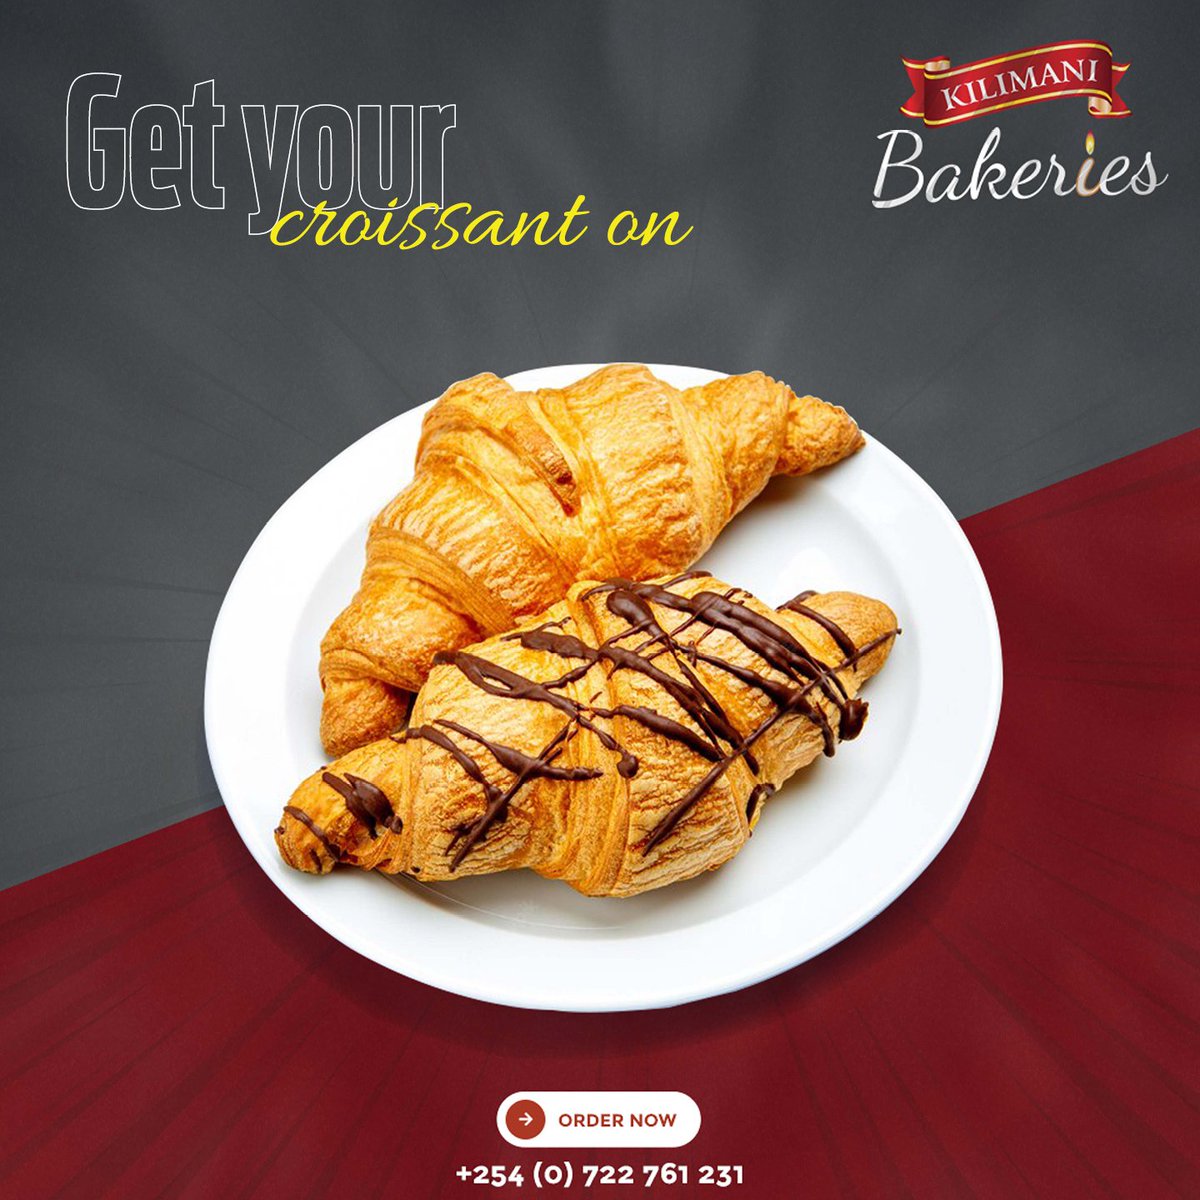 The perfect snack to lift your spirits after a long week, all soft and fluffy. Like a hug from grandma!
To place your order
Contact us: 0722 761 231 
#kilimanibakeries
#croissant
#softandfluffy
#pastries
#liftyourspirits
#fridayvibes